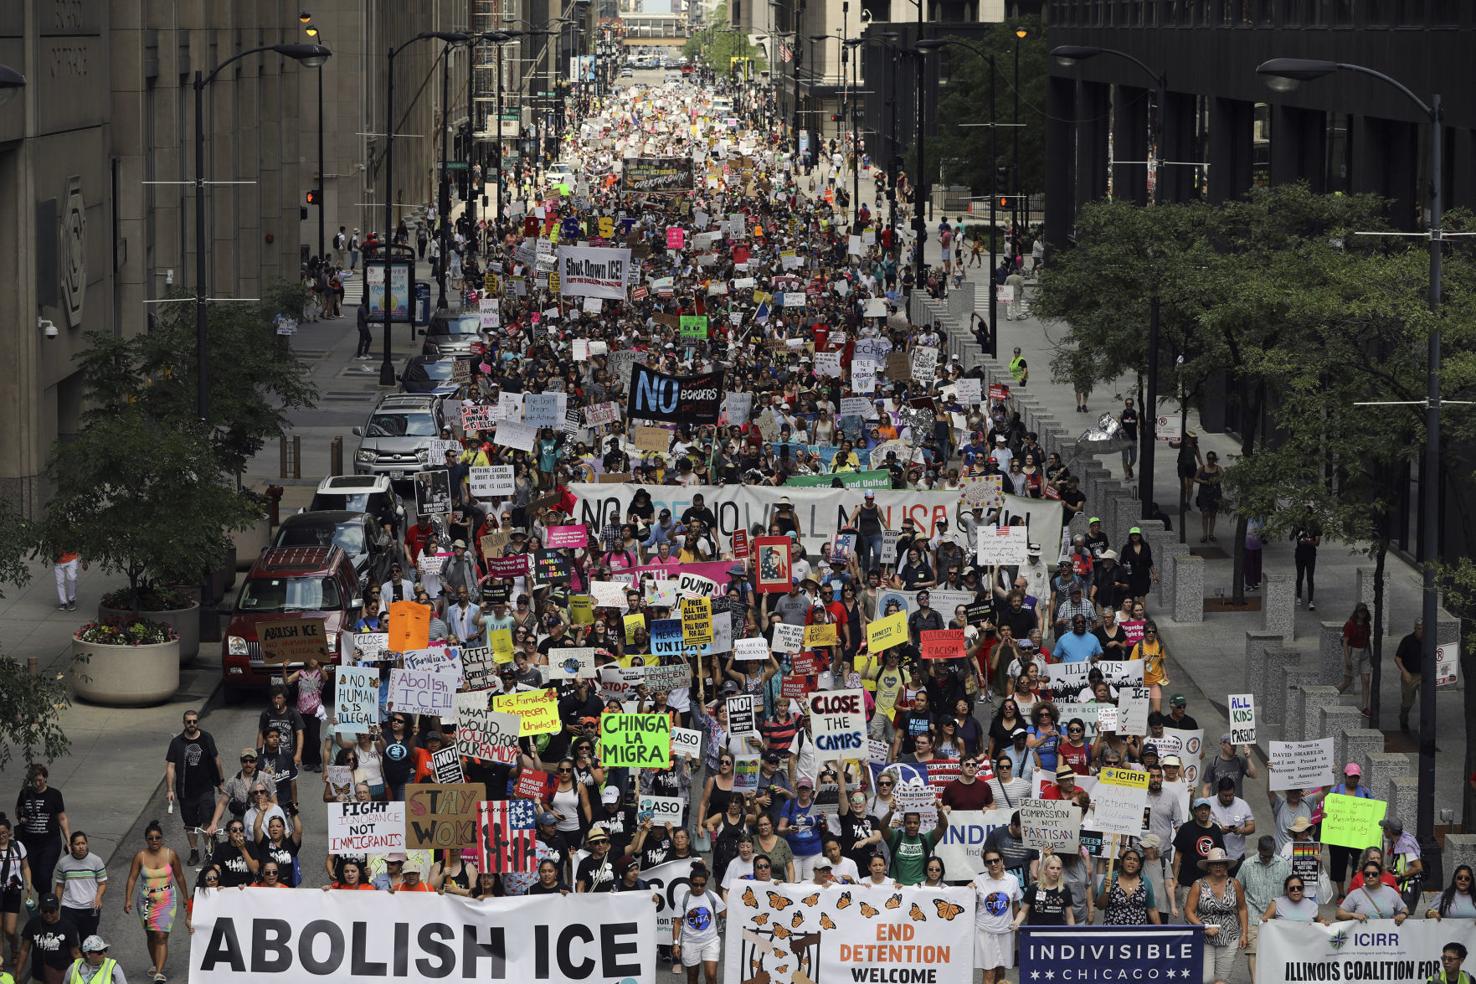 Thousands protest Trump immigration policies in Chicago